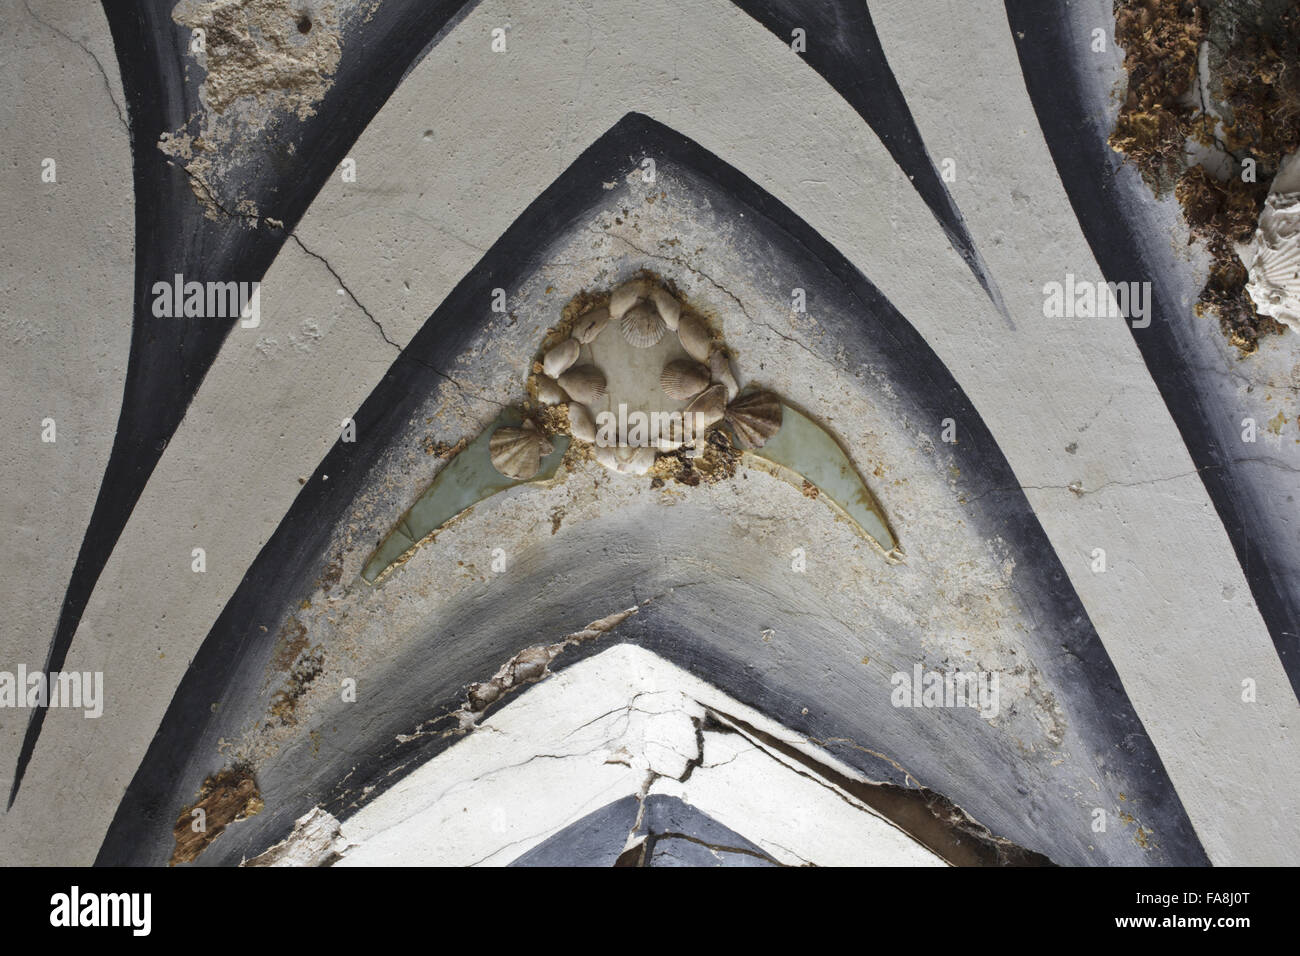 Detail of part of the decoration on the upper stairs of the Shell Gallery at A la Ronde, Devon. Stock Photo